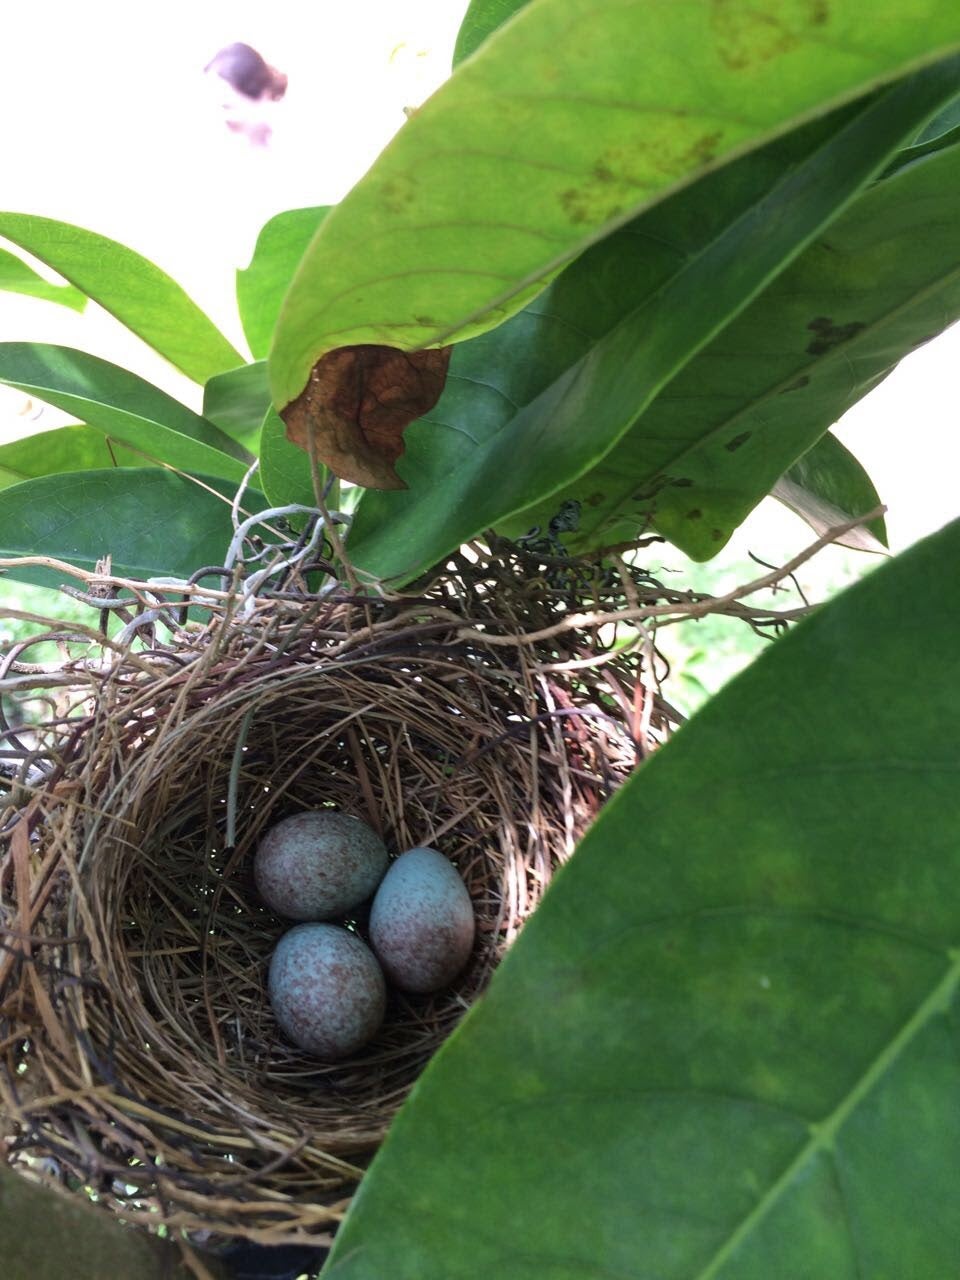 Three blue speckled eggs in a bird's nest